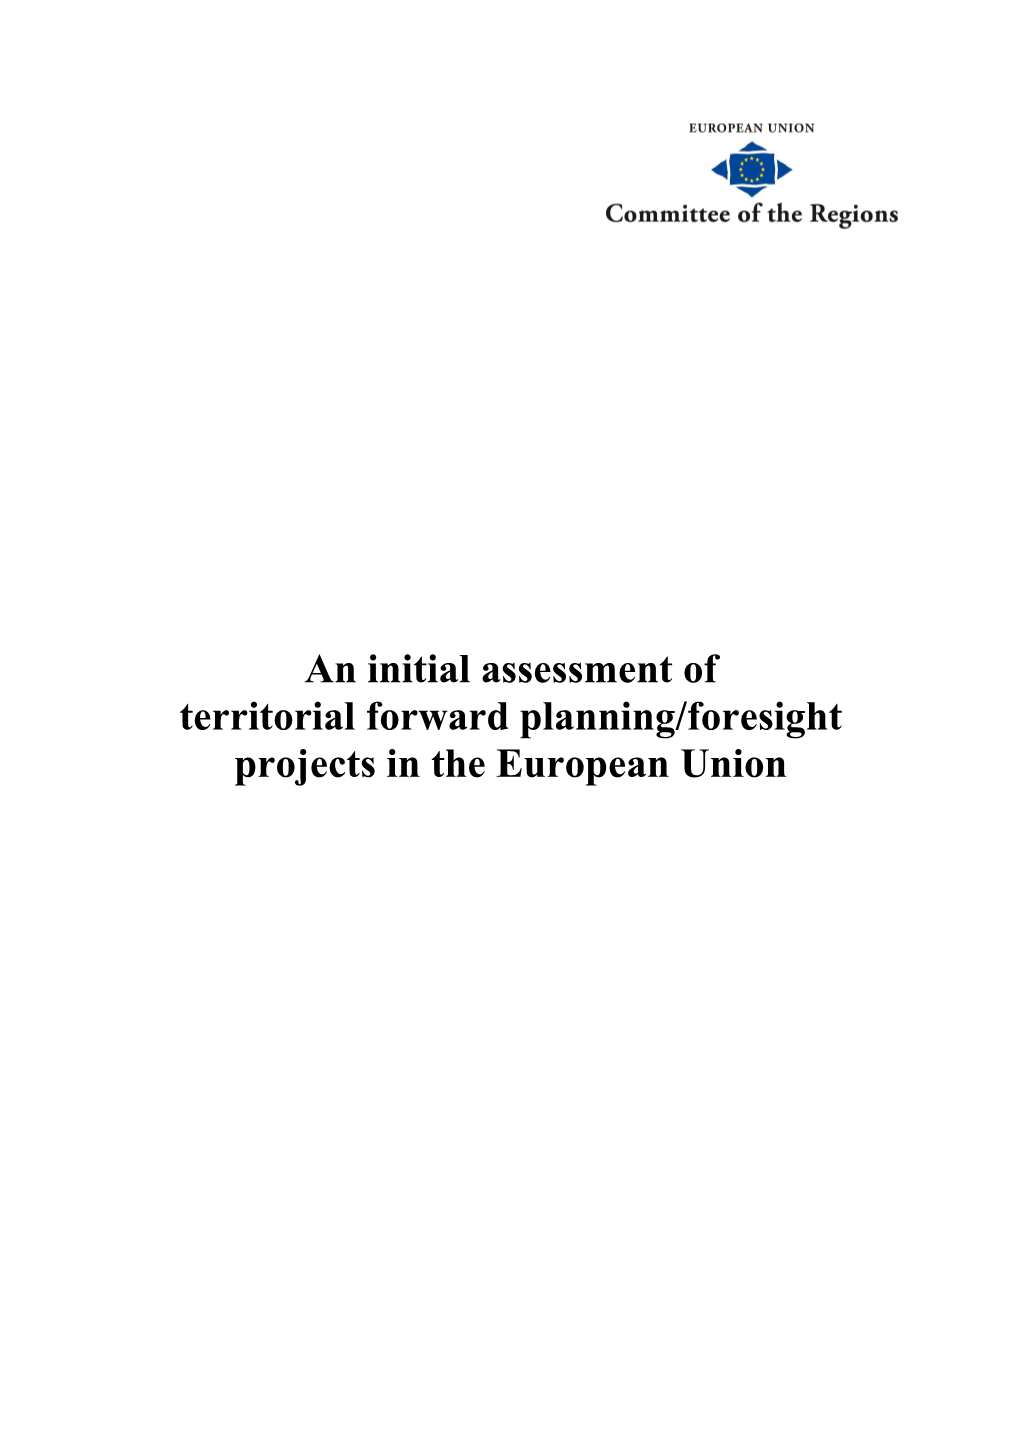 An Initial Assessment of Territorial Forward Planning/Foresight Projects in the European Union